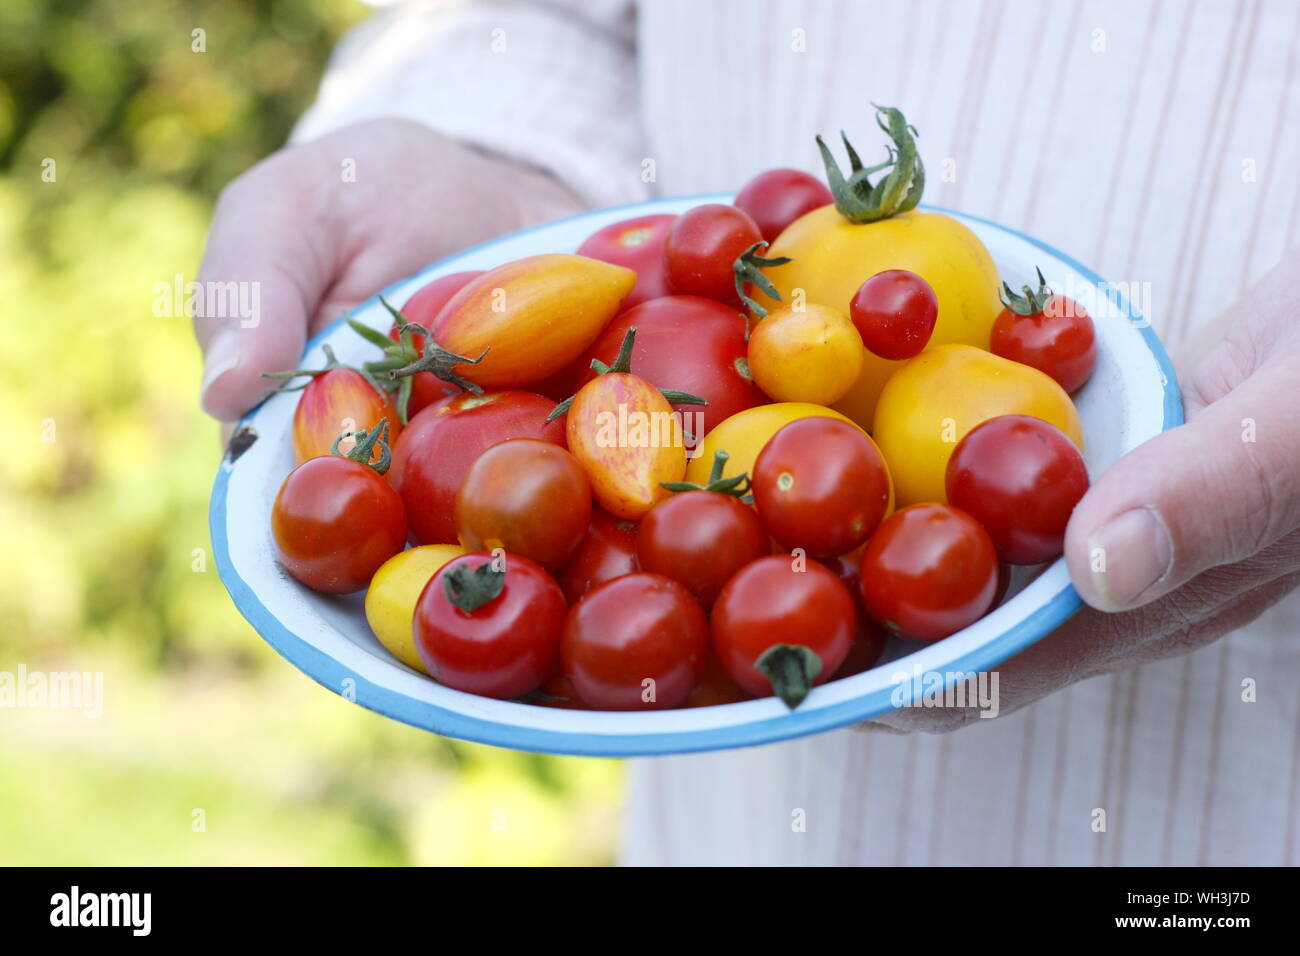 Solanum lycopersicum. Freshly picked homegrown tomatoes on a plate in a UK garden - Golden sunrise, Sweet Million and Tumbling Tom. Stock Photo